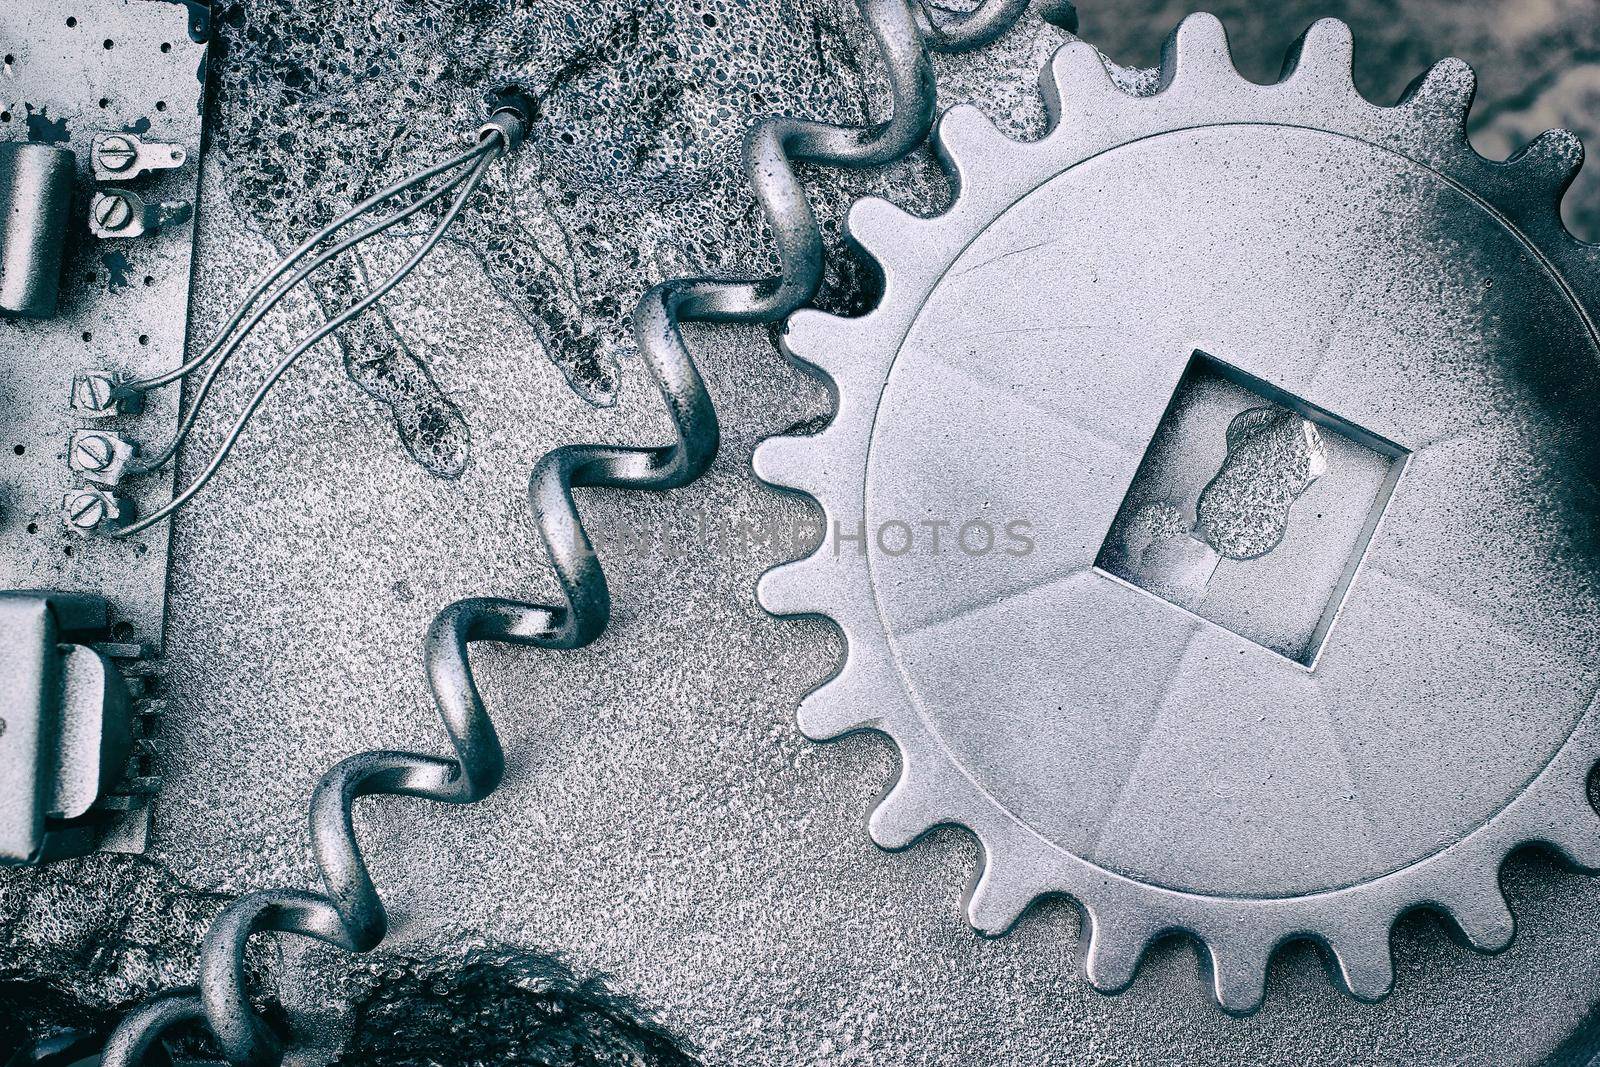 Silver grey grunge gears and wheels create an industrial steampunk background